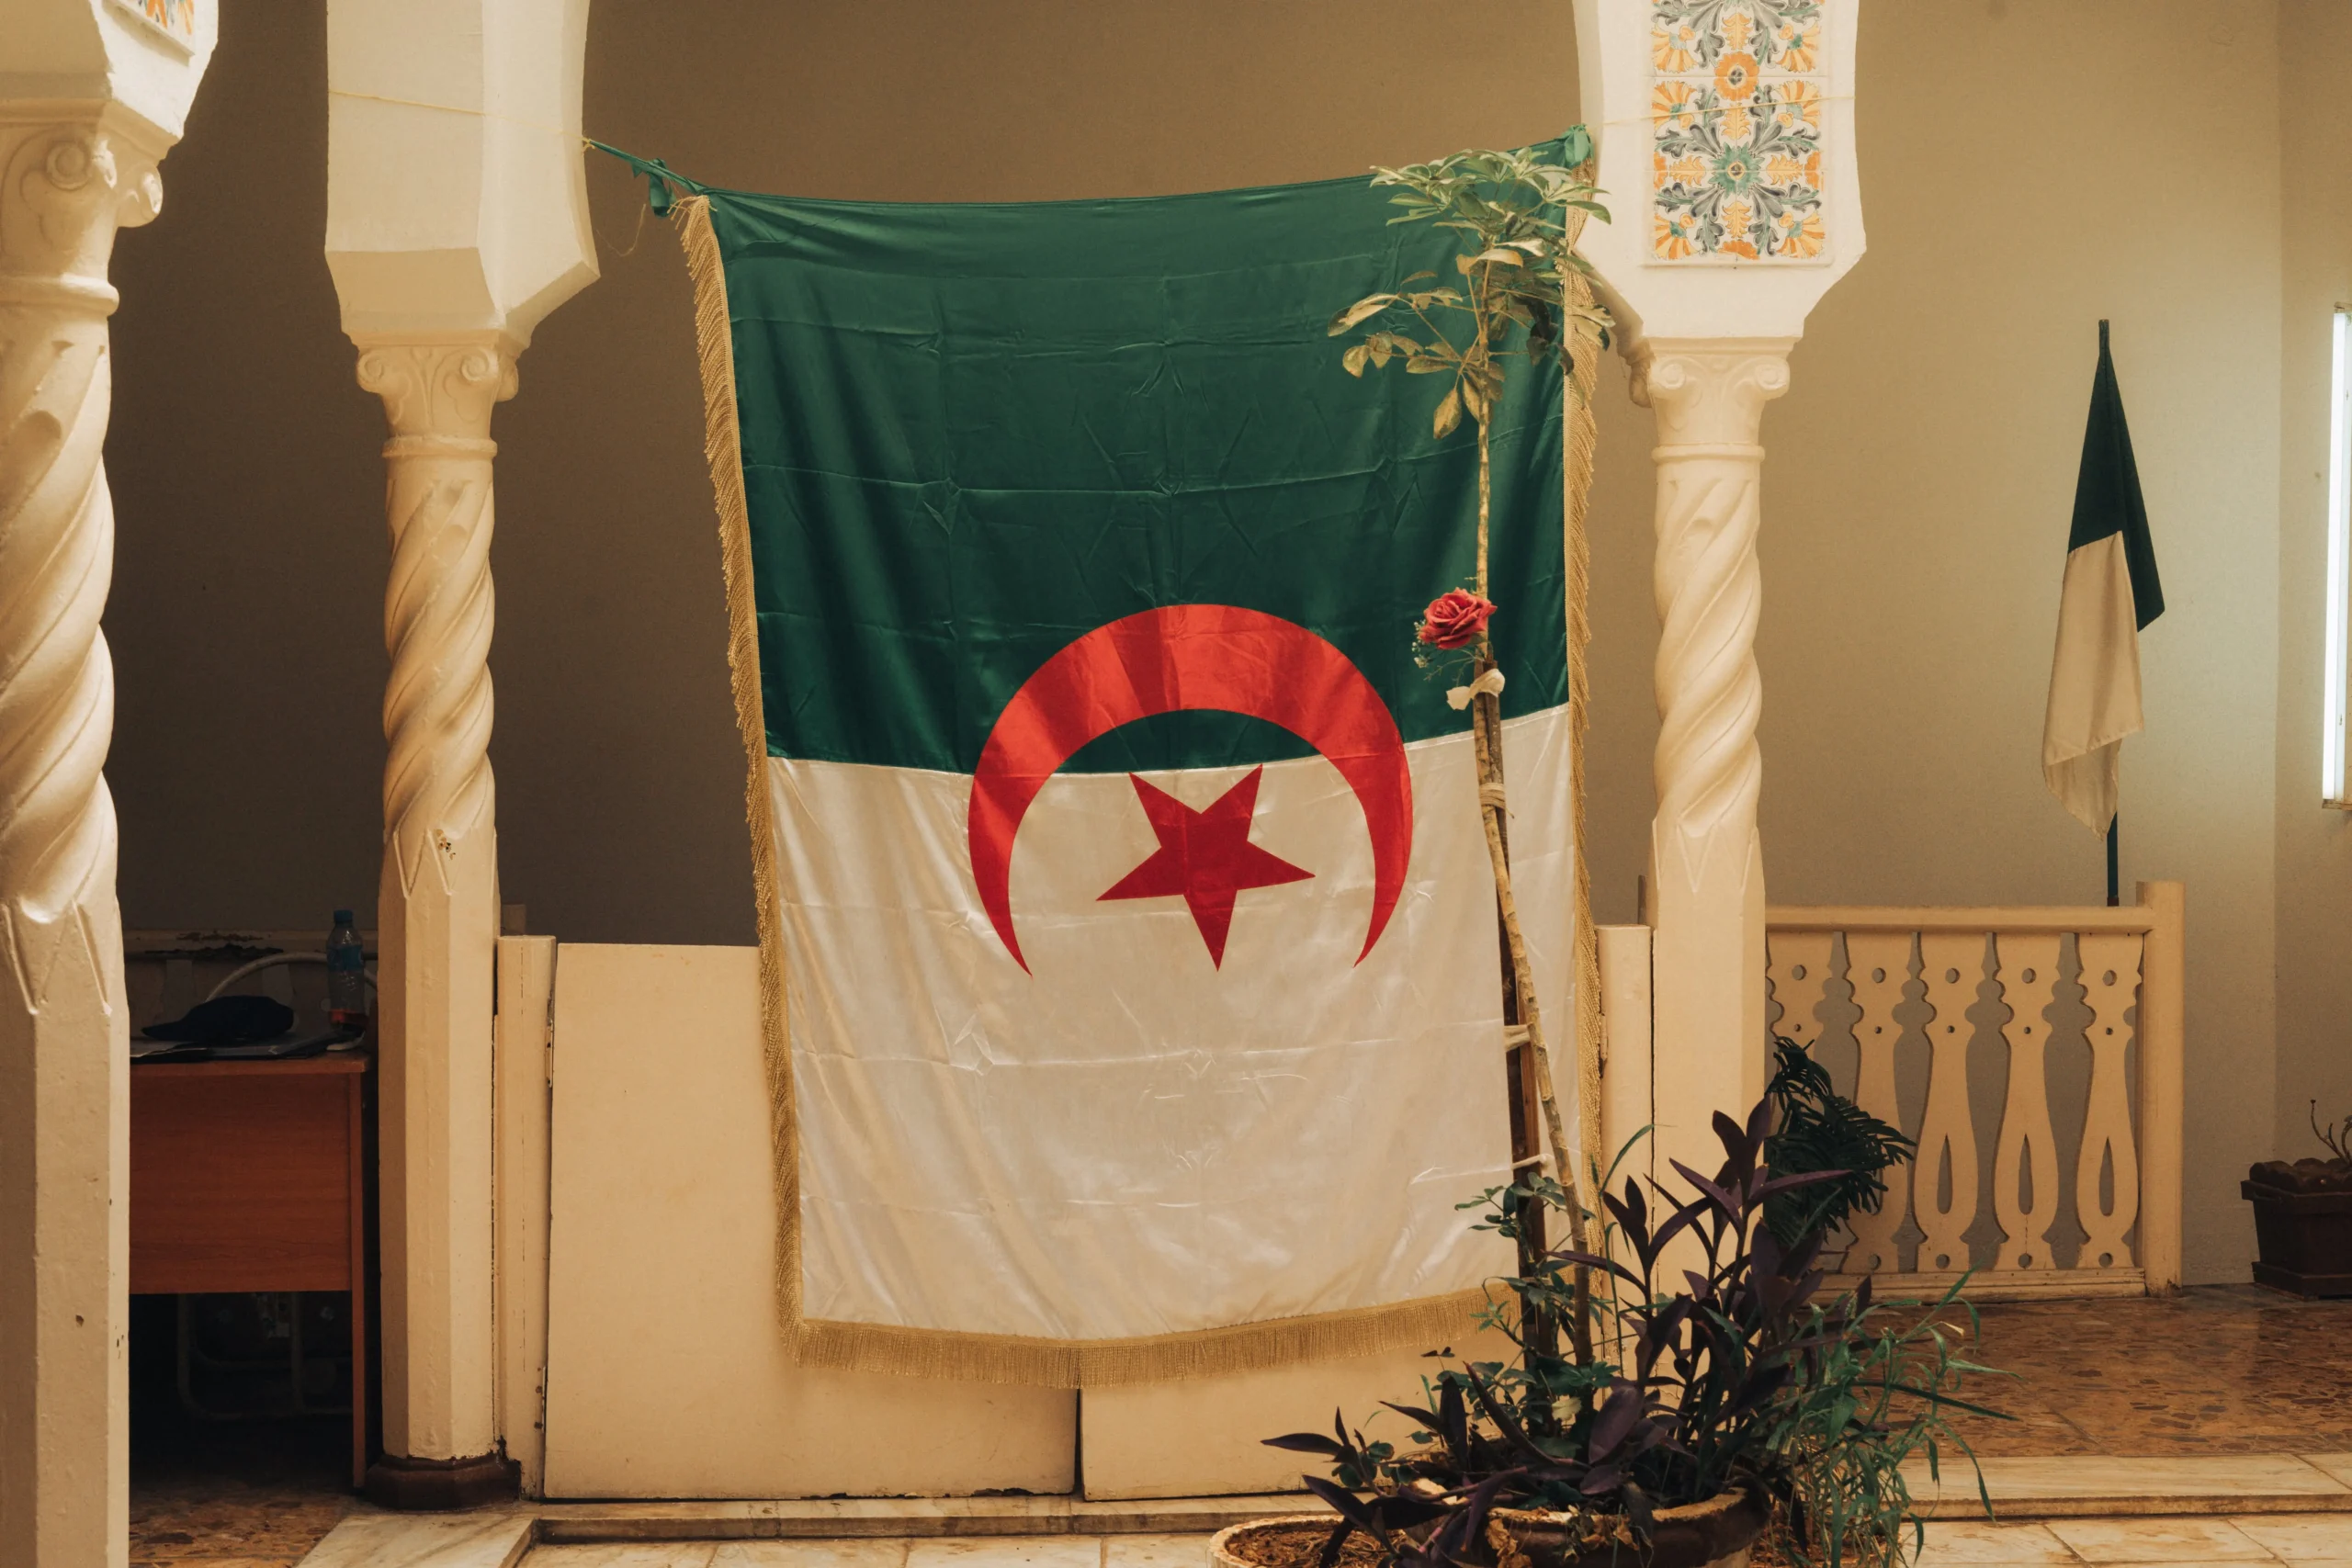 an image showing the flag of algeria